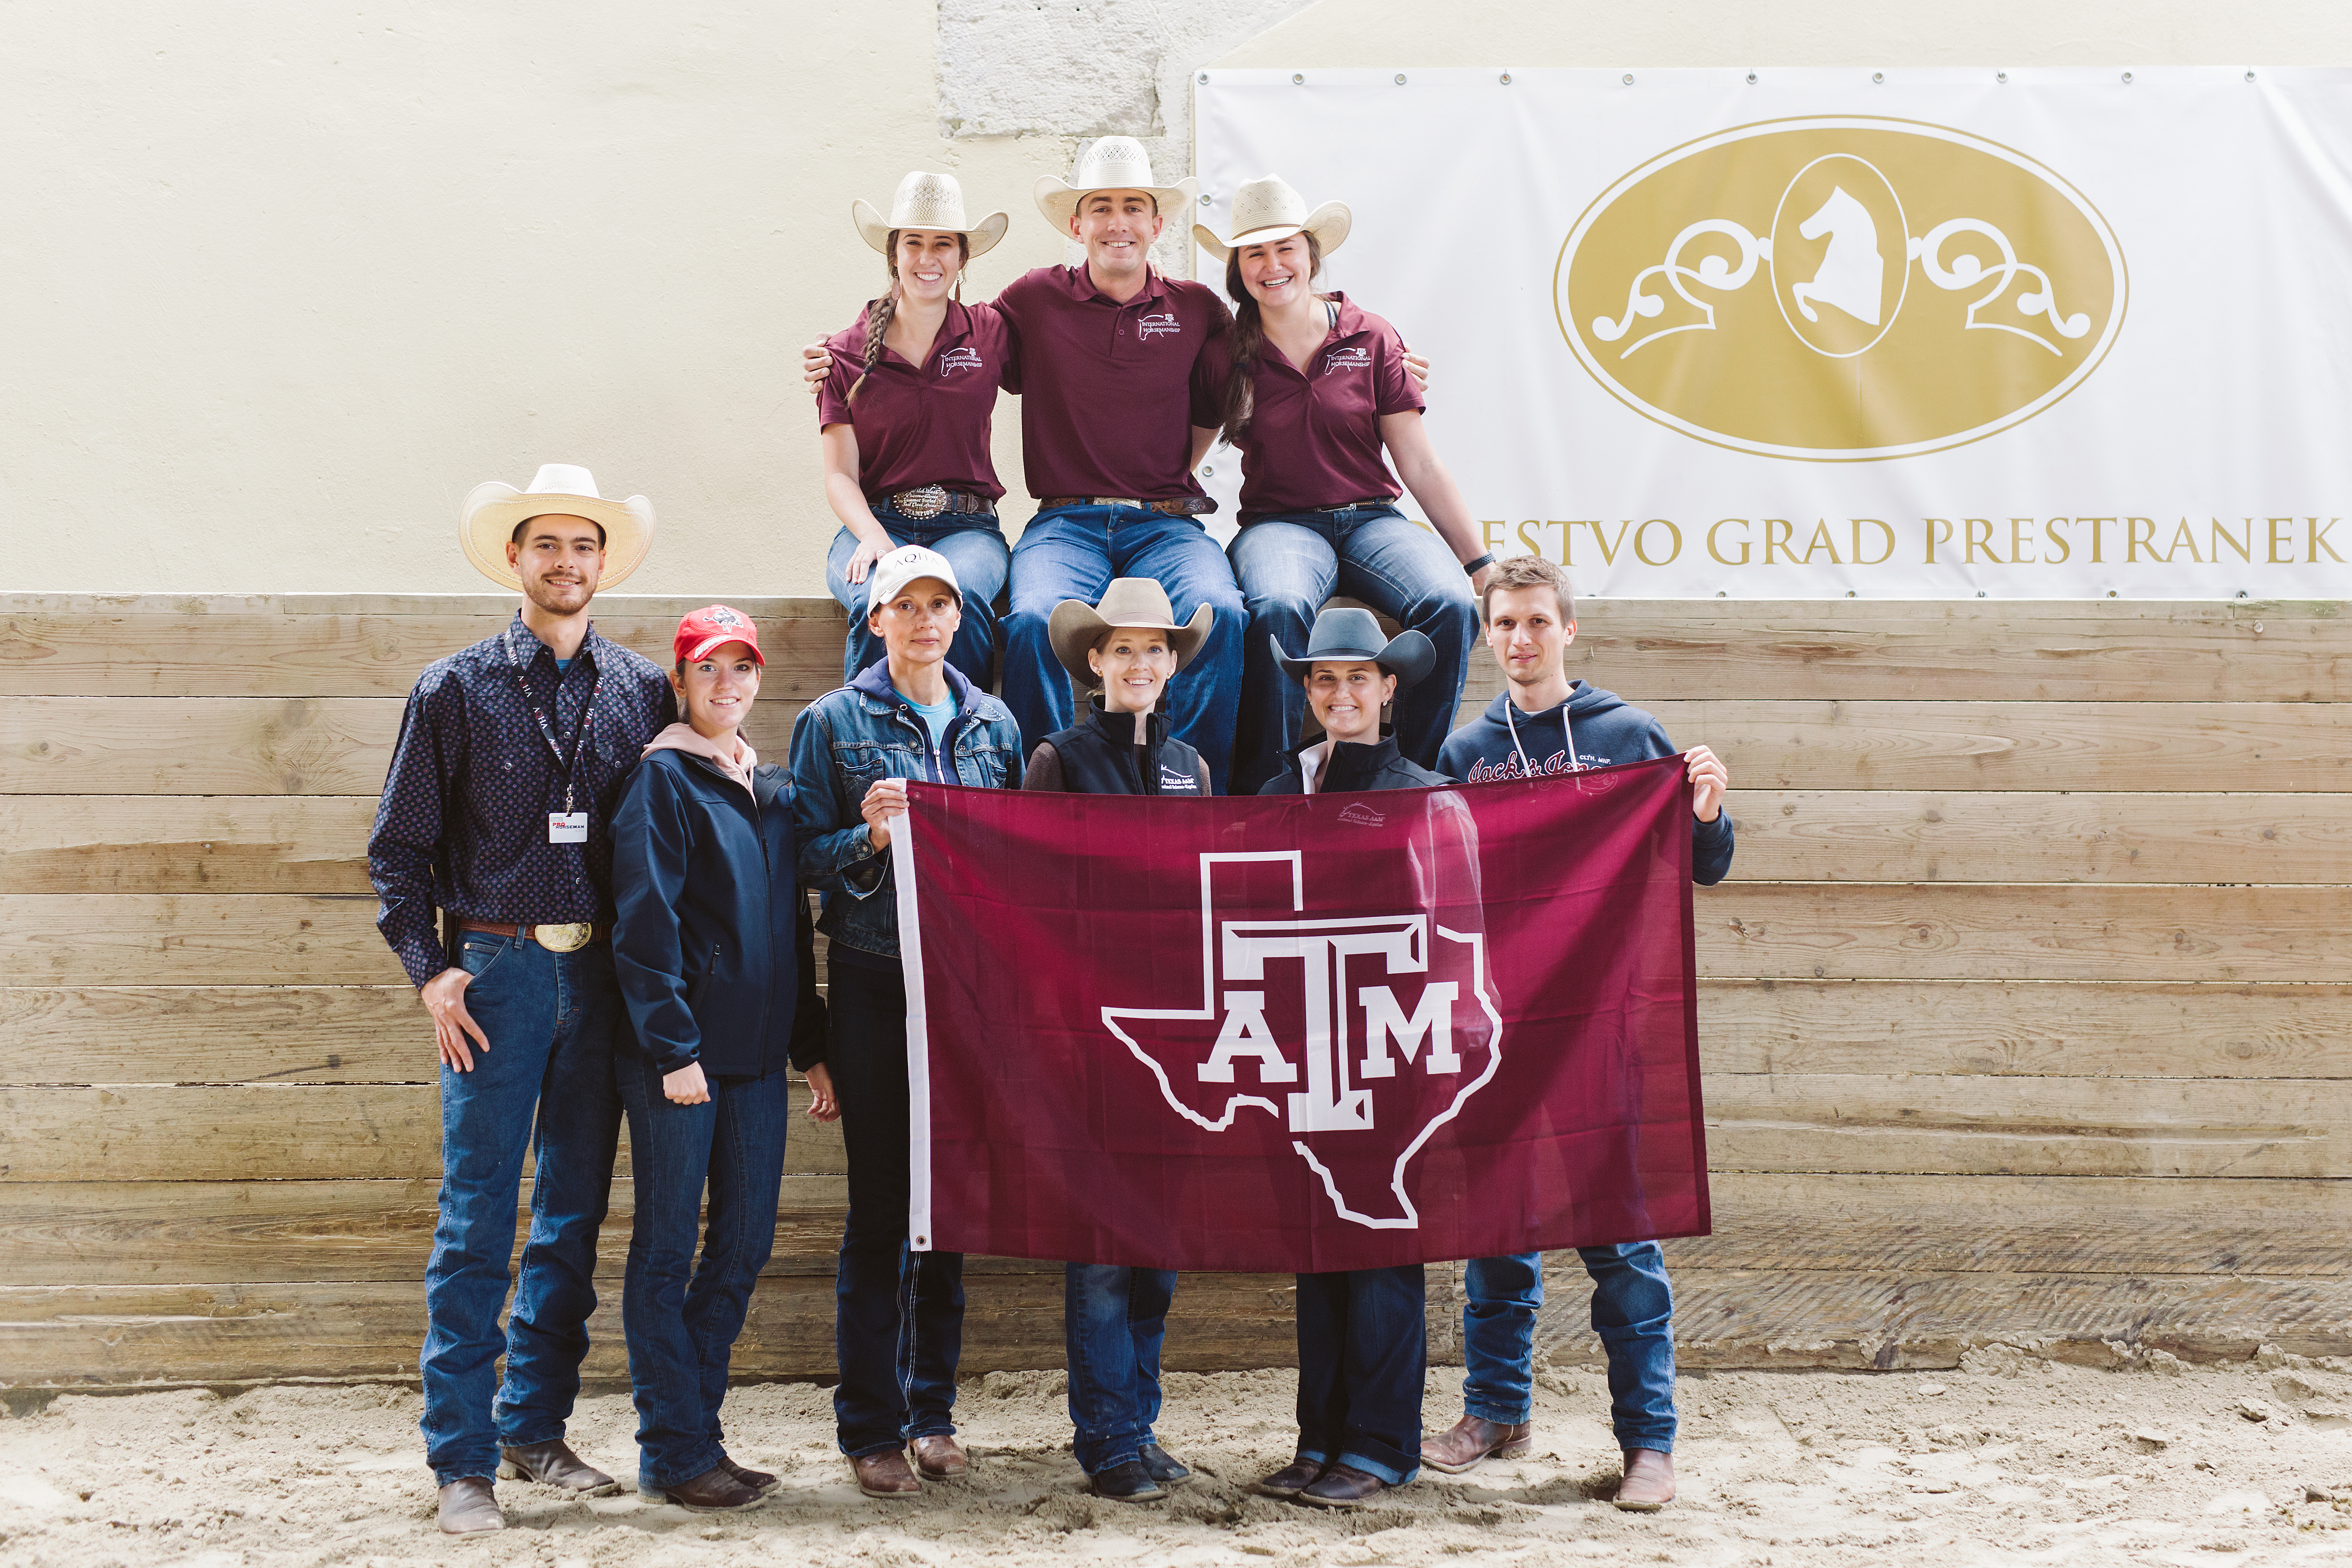 Instructors and attendees pose with aggie flag in Slovenia.